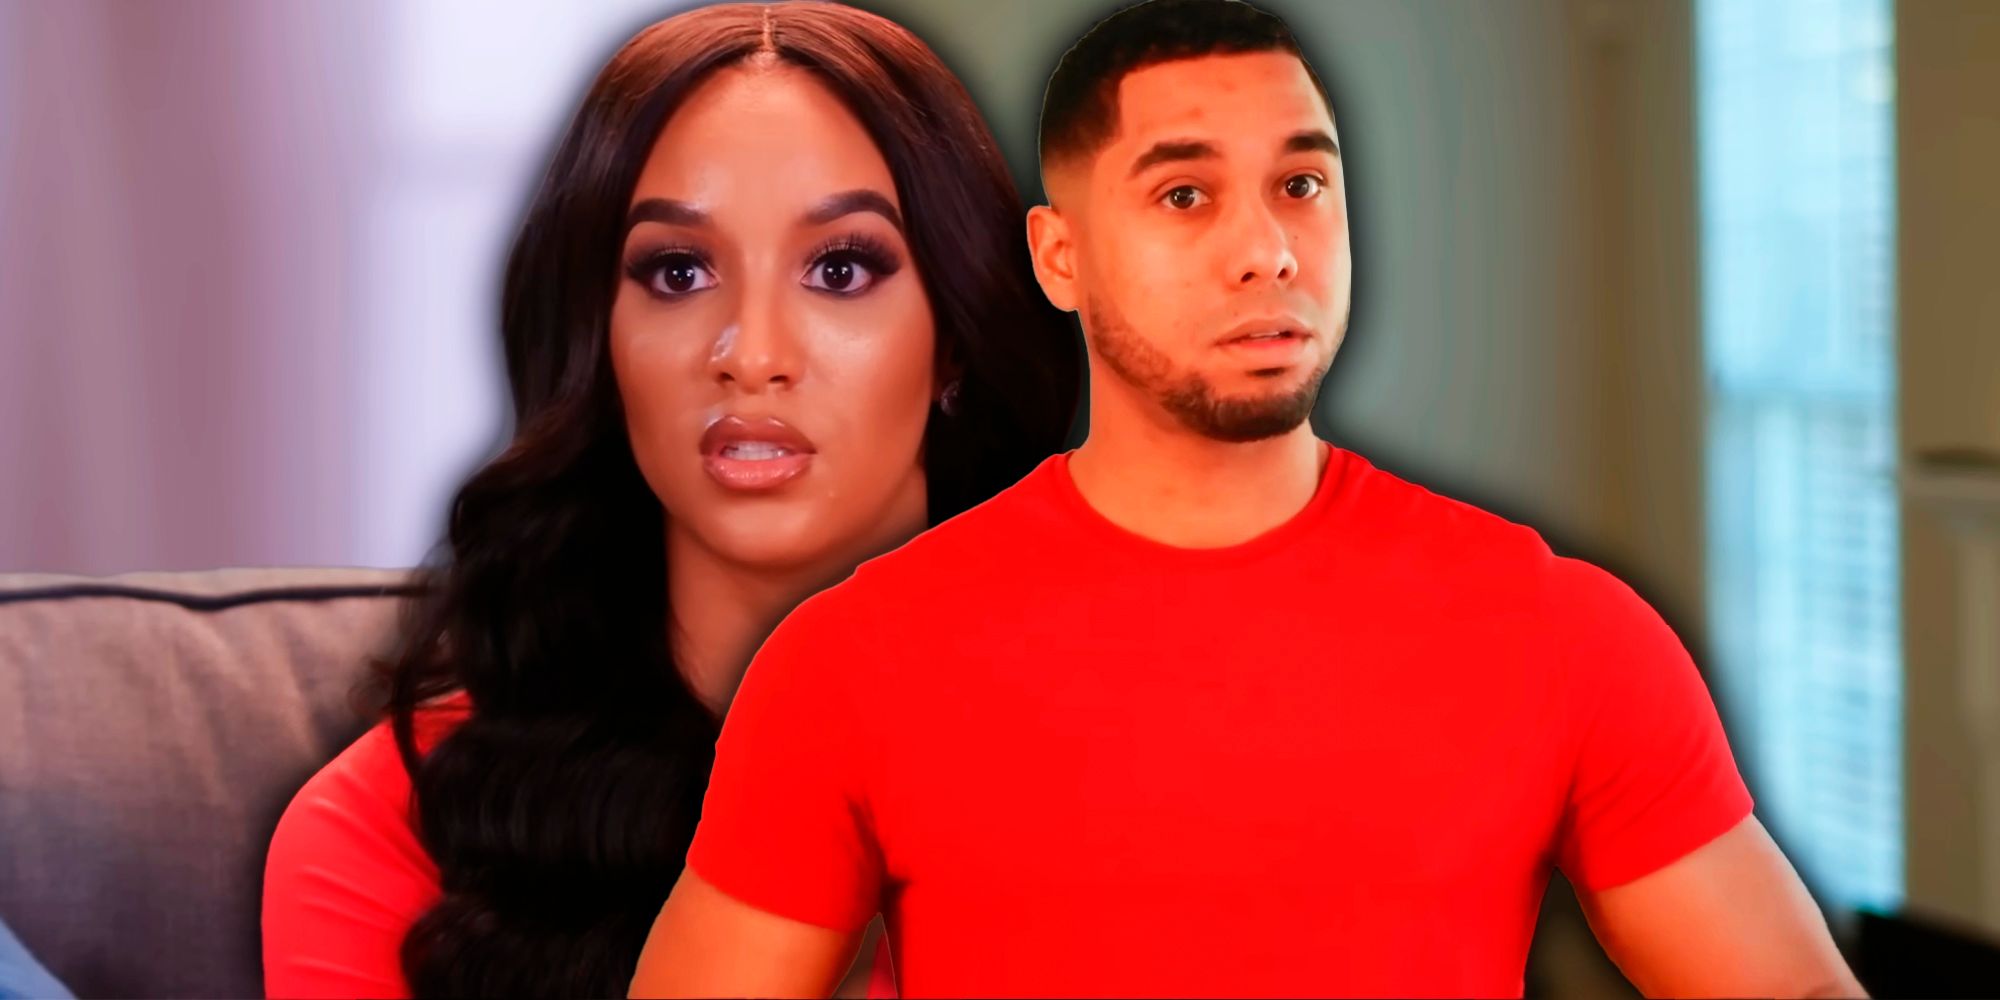 90 Day Fiancé montage of Pedro and Chantel wearing red outfits